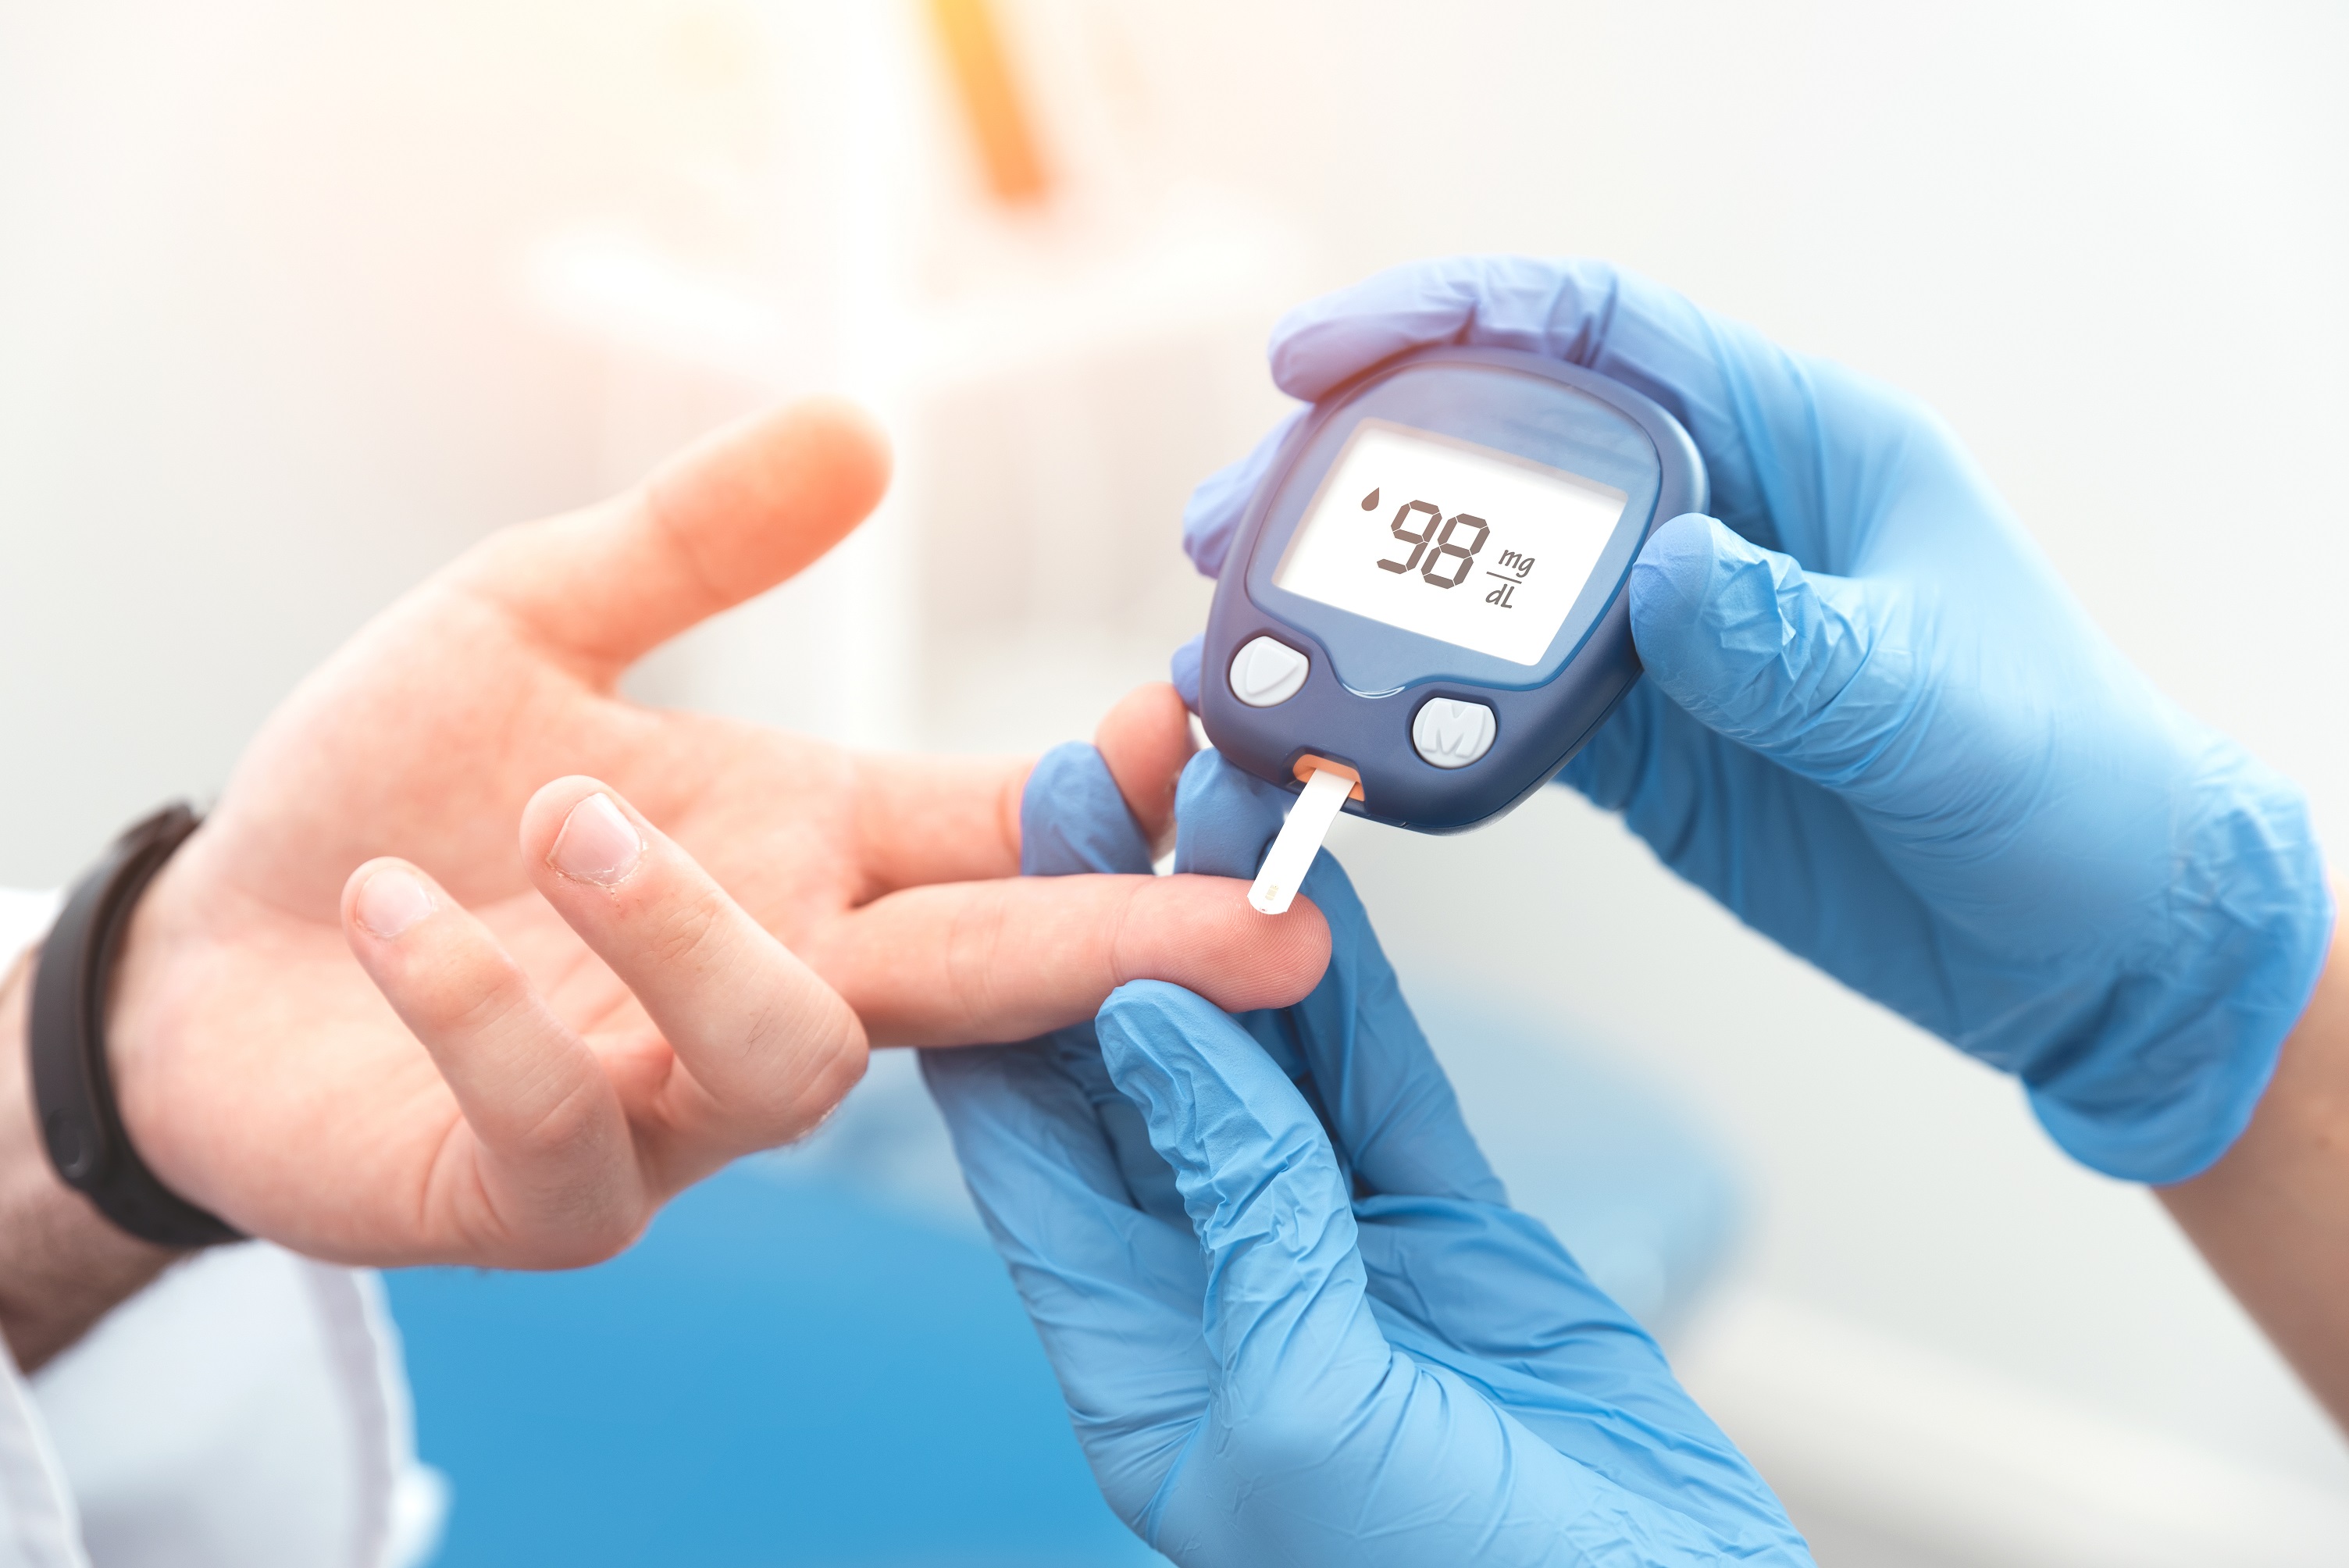 Key cause of type 2 diabetes uncovered | University of Oxford